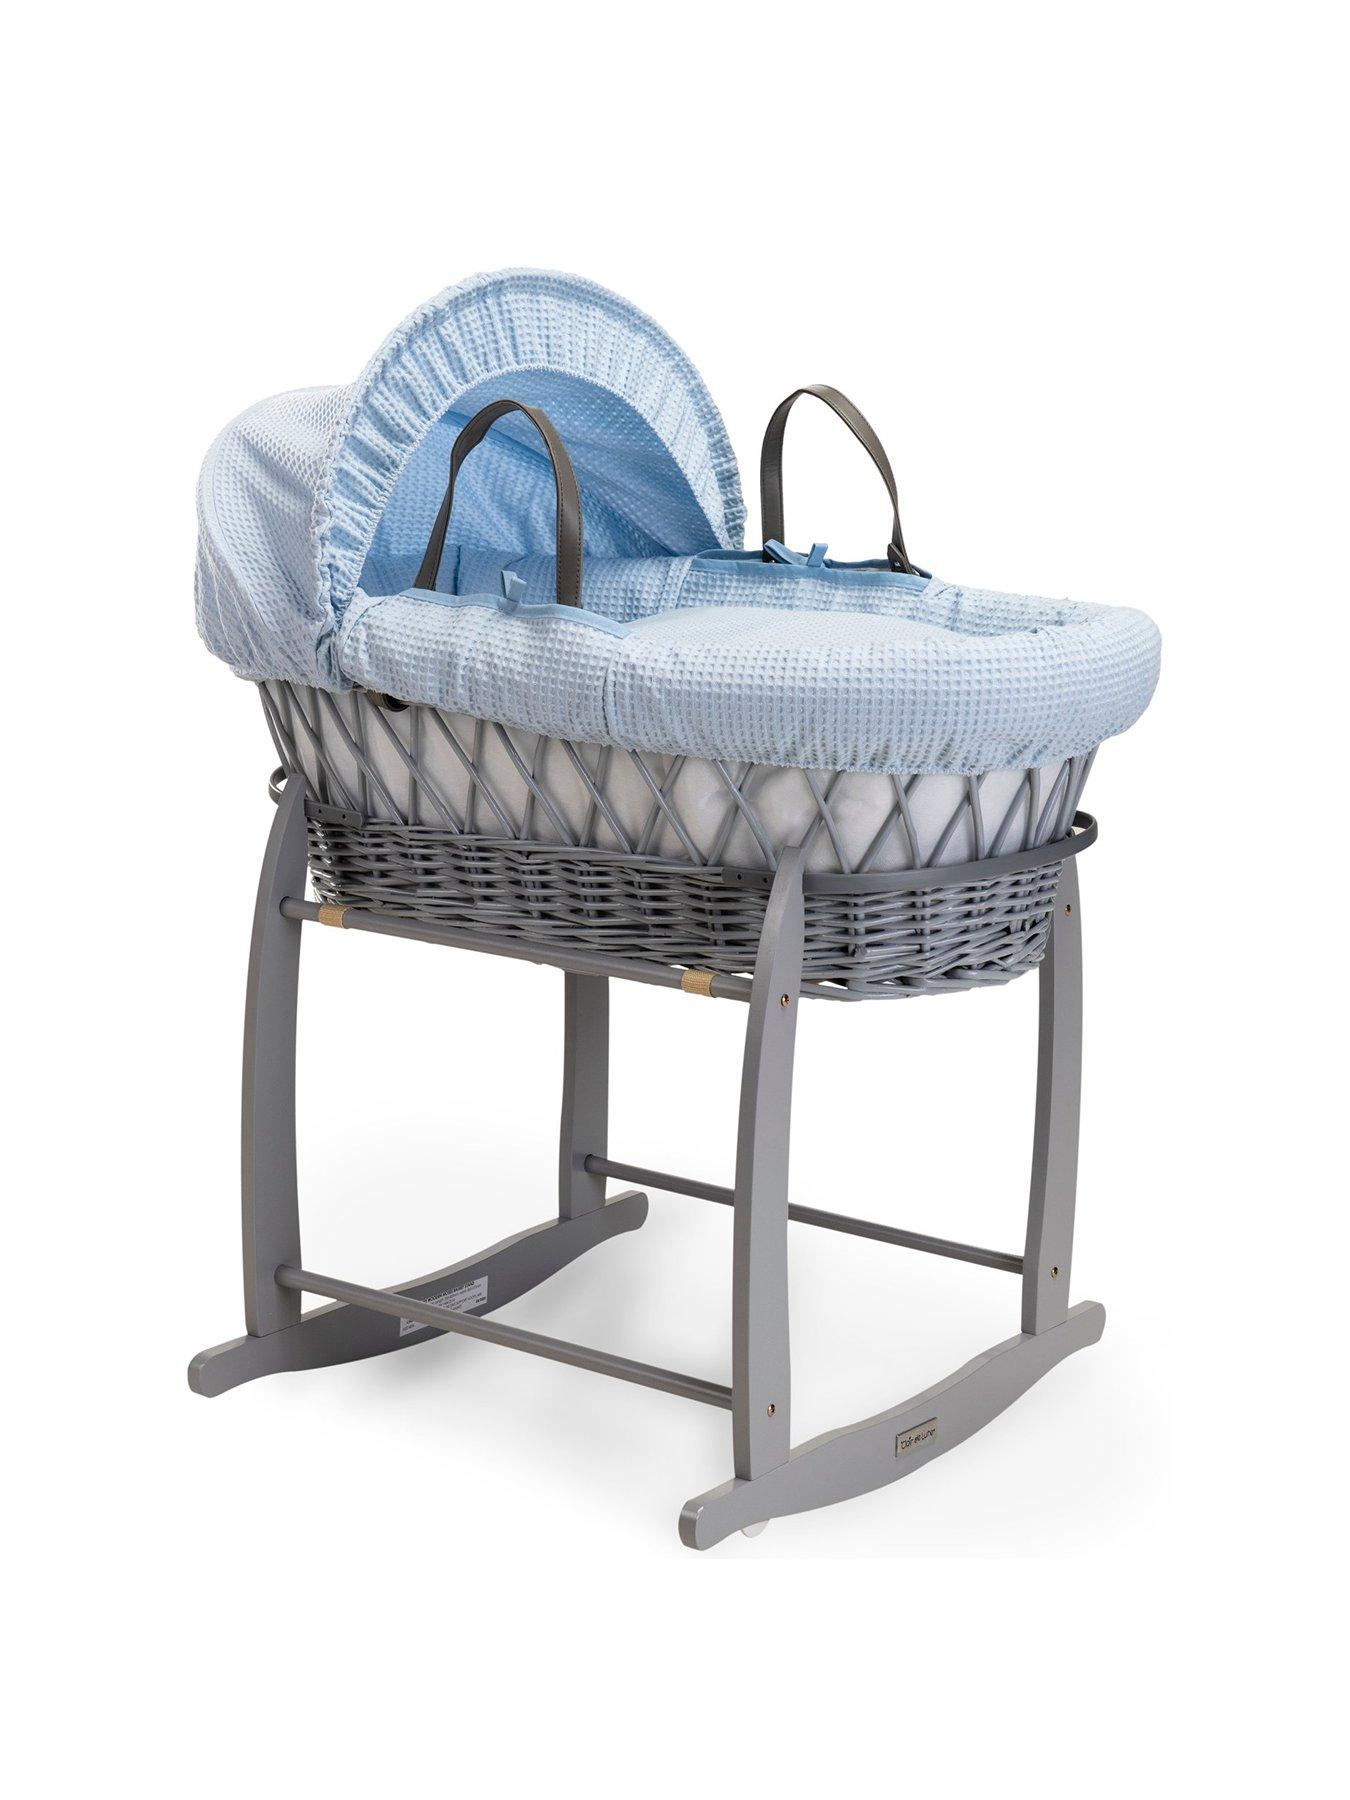 MOSES BASKET FOAM MATTRESS BASSINET BABY PRAM BREATHABLE QUILTED 64 X 28 X 3.5cm 